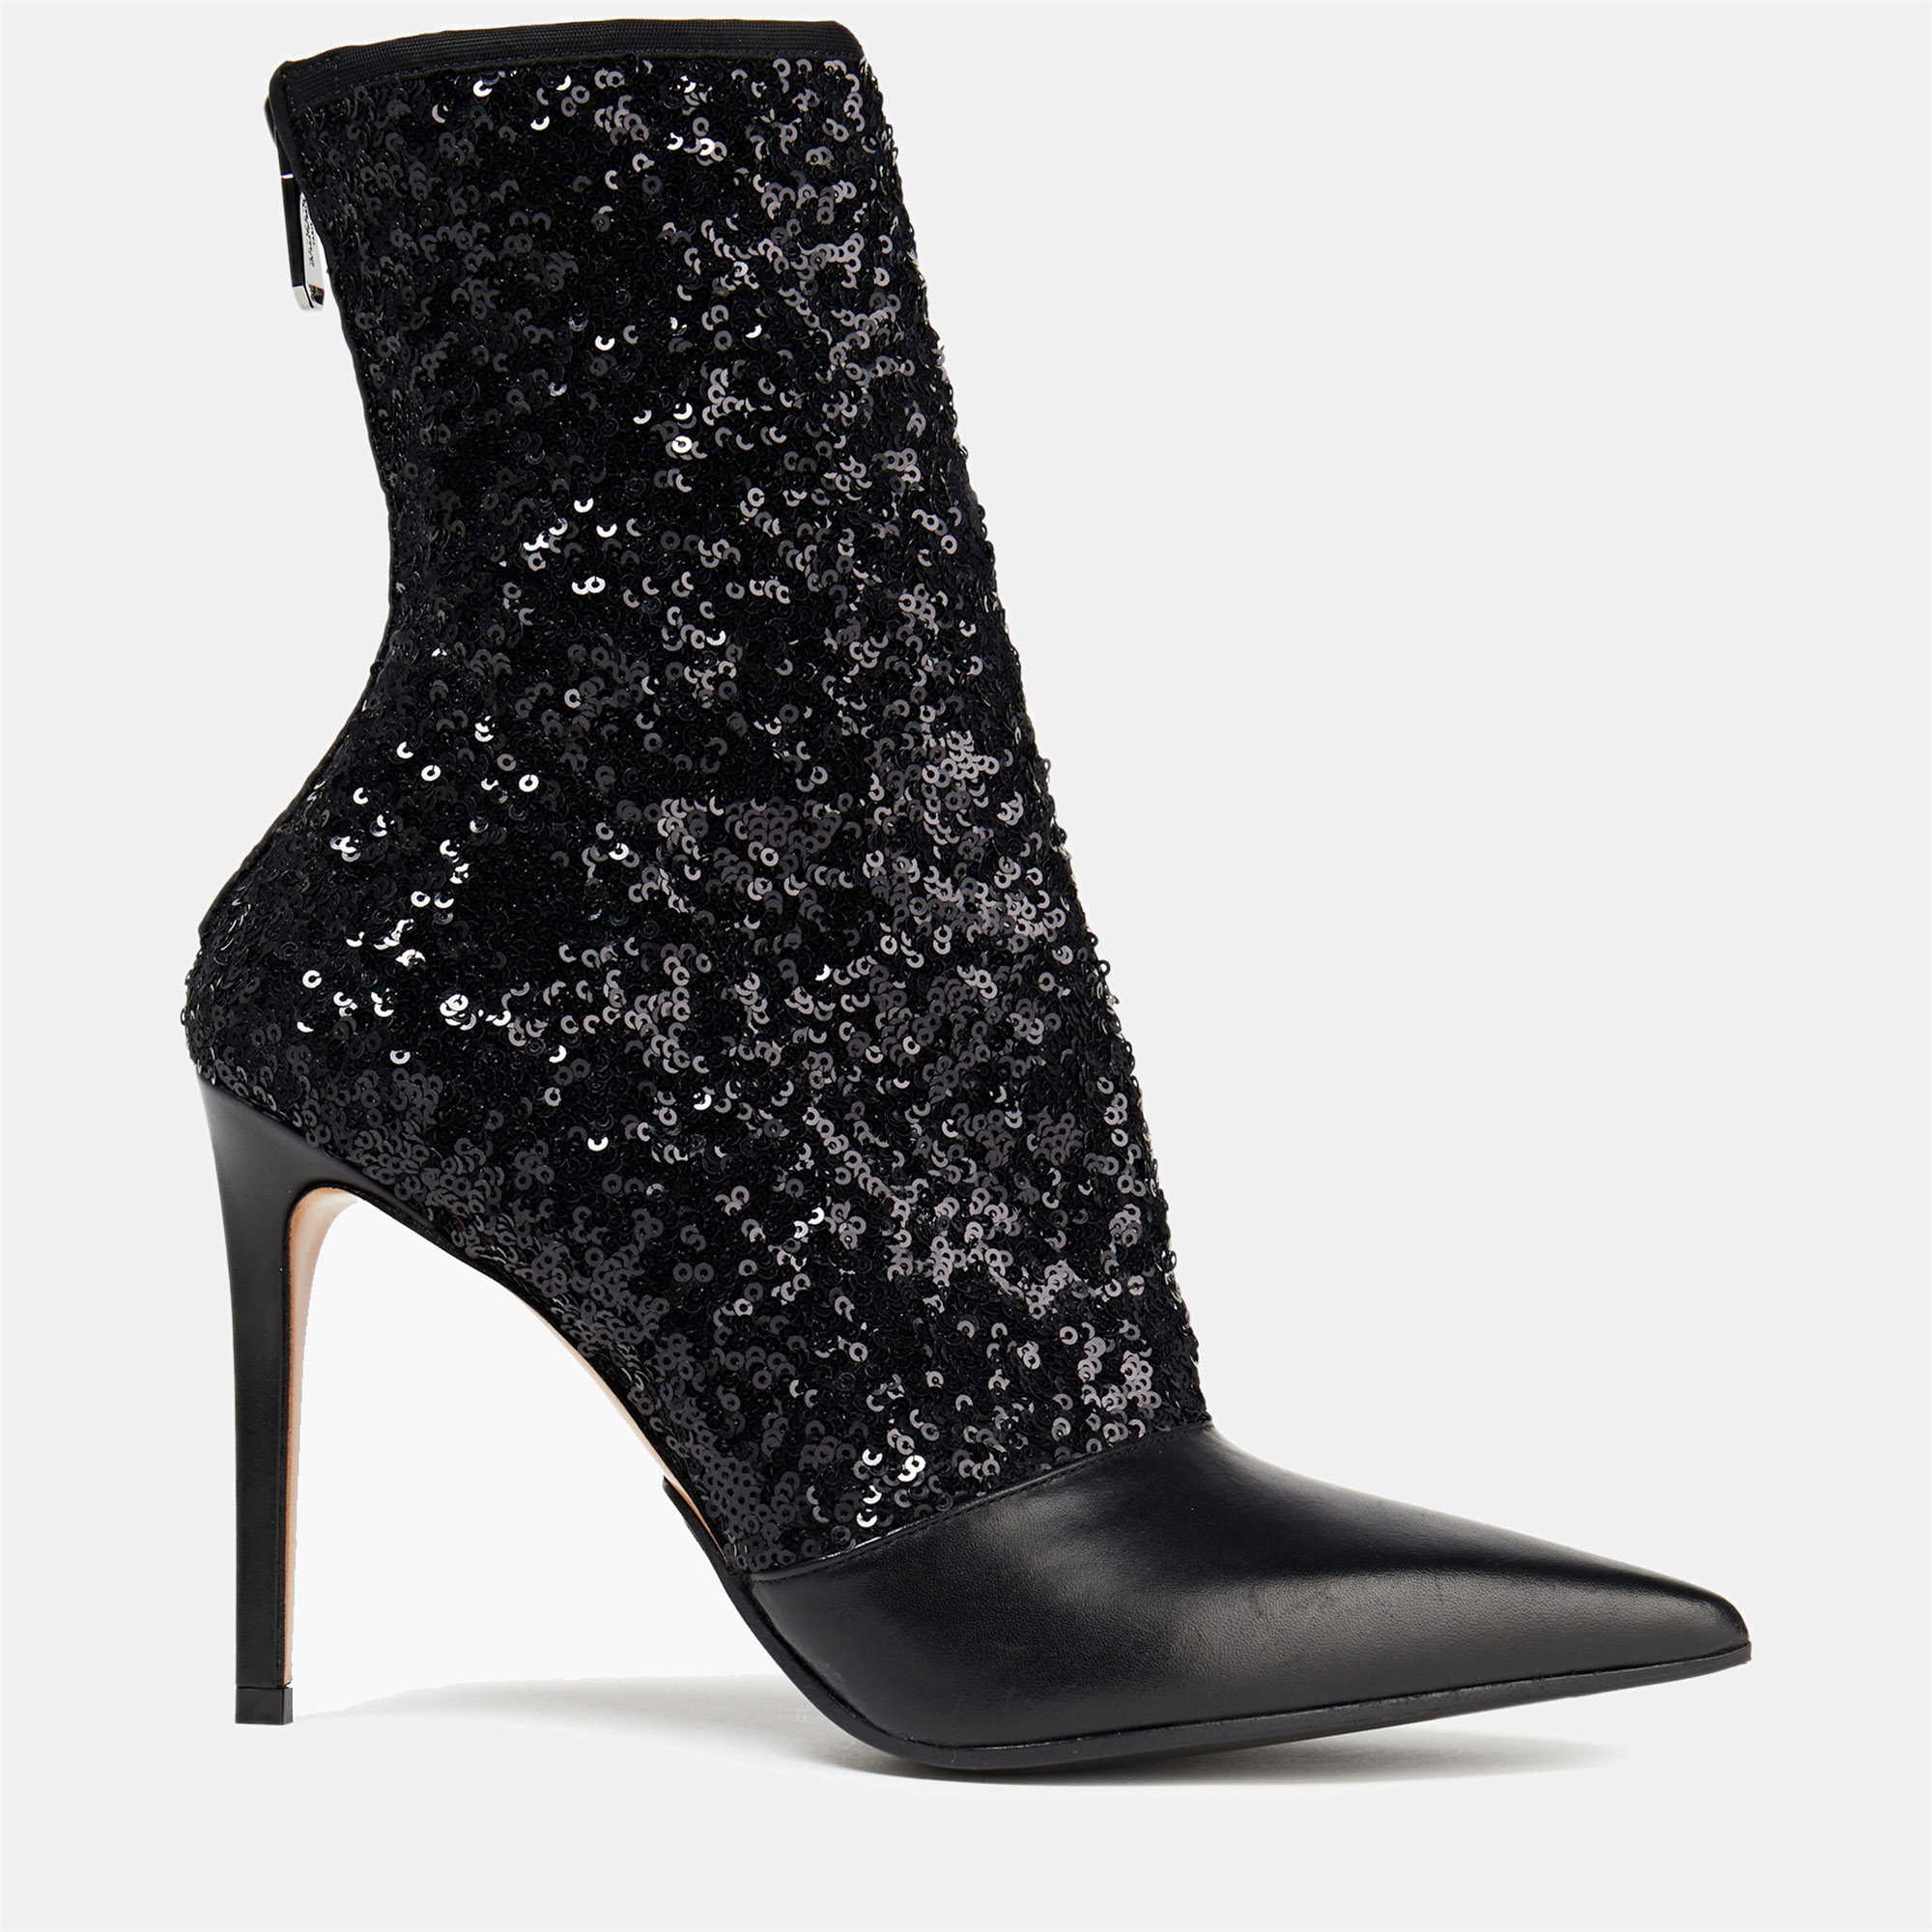 Balmain black sequins and leather ankle boots size 38.5